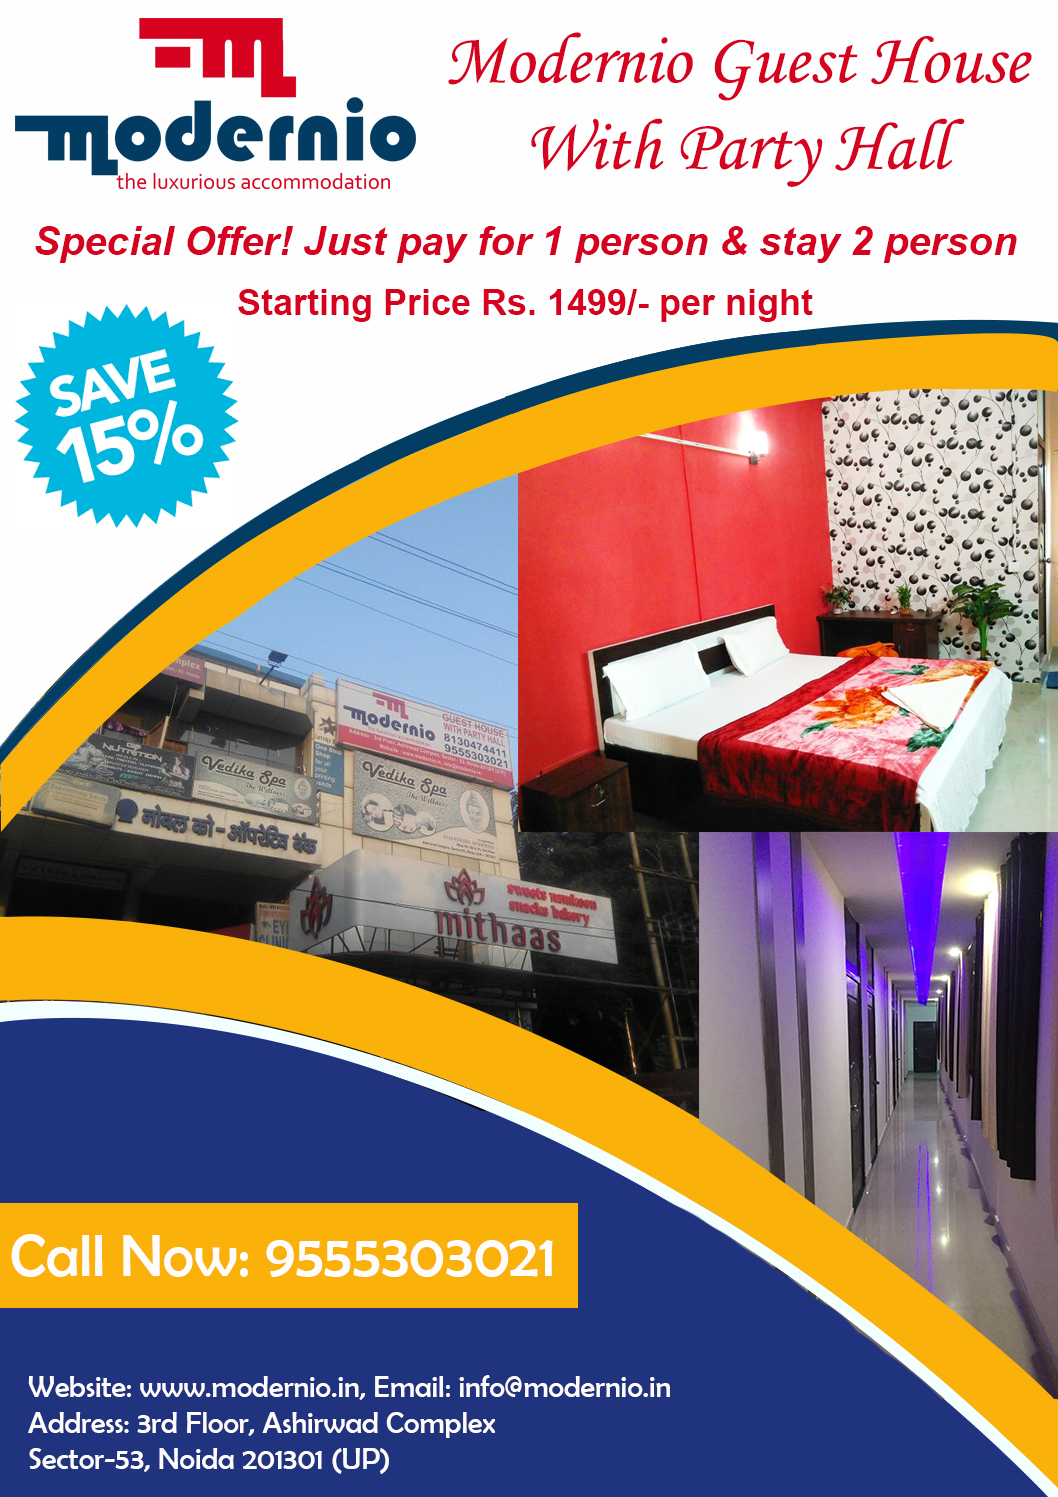 Modernio Guest House Offers!